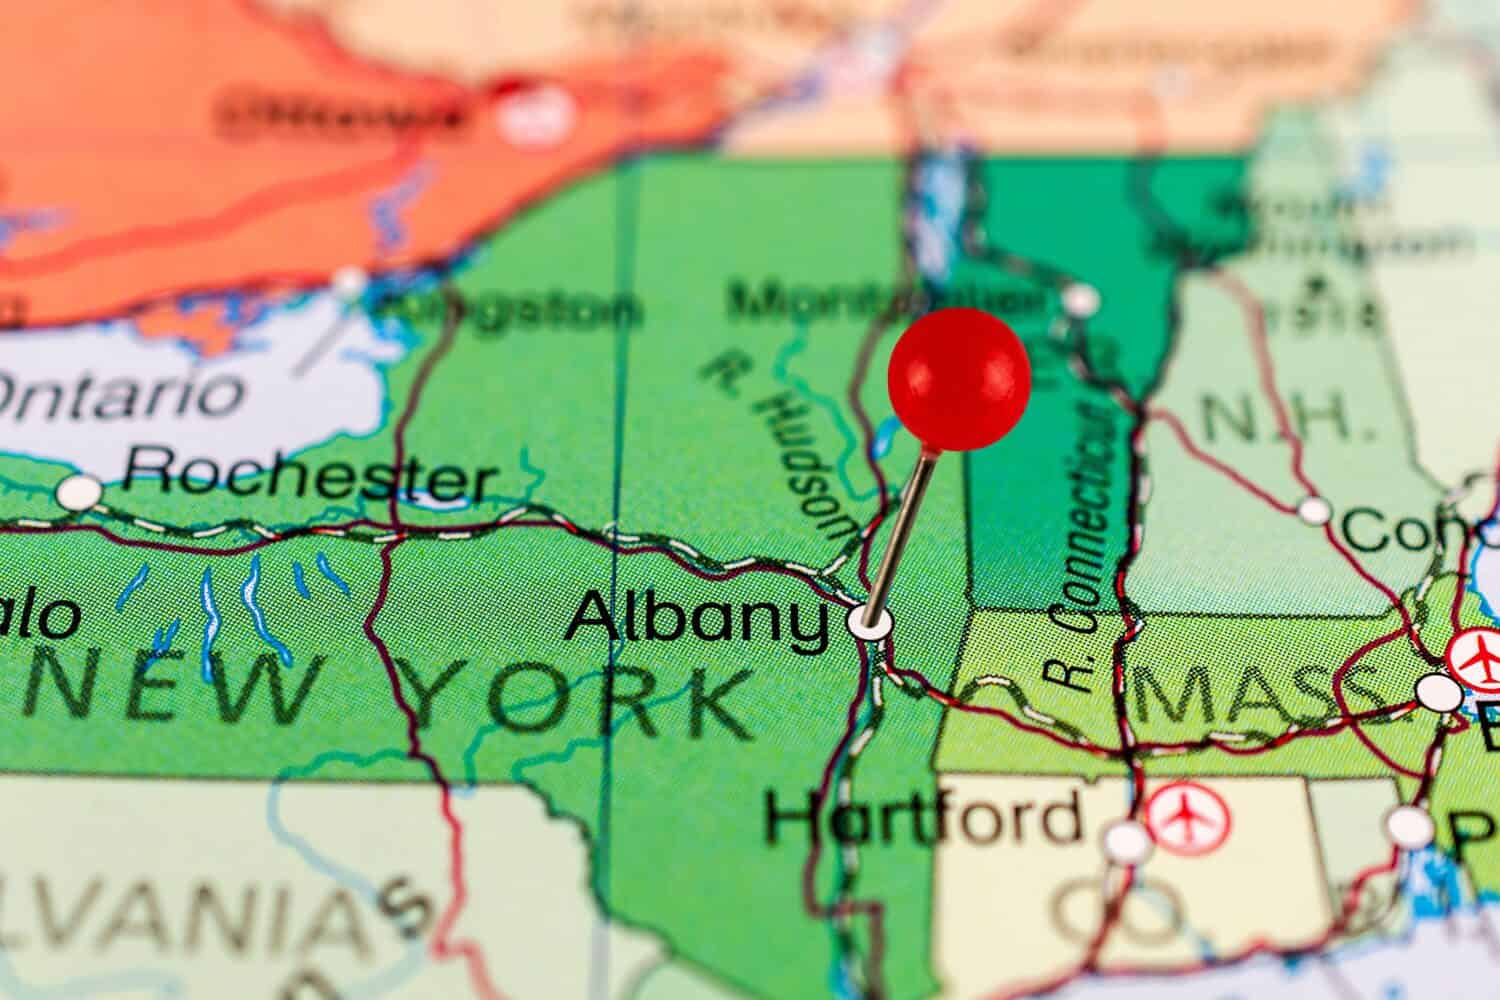 Albany pin map. Close up of Albany map with red pin. Map with red pin point of Albany in USA, New York.